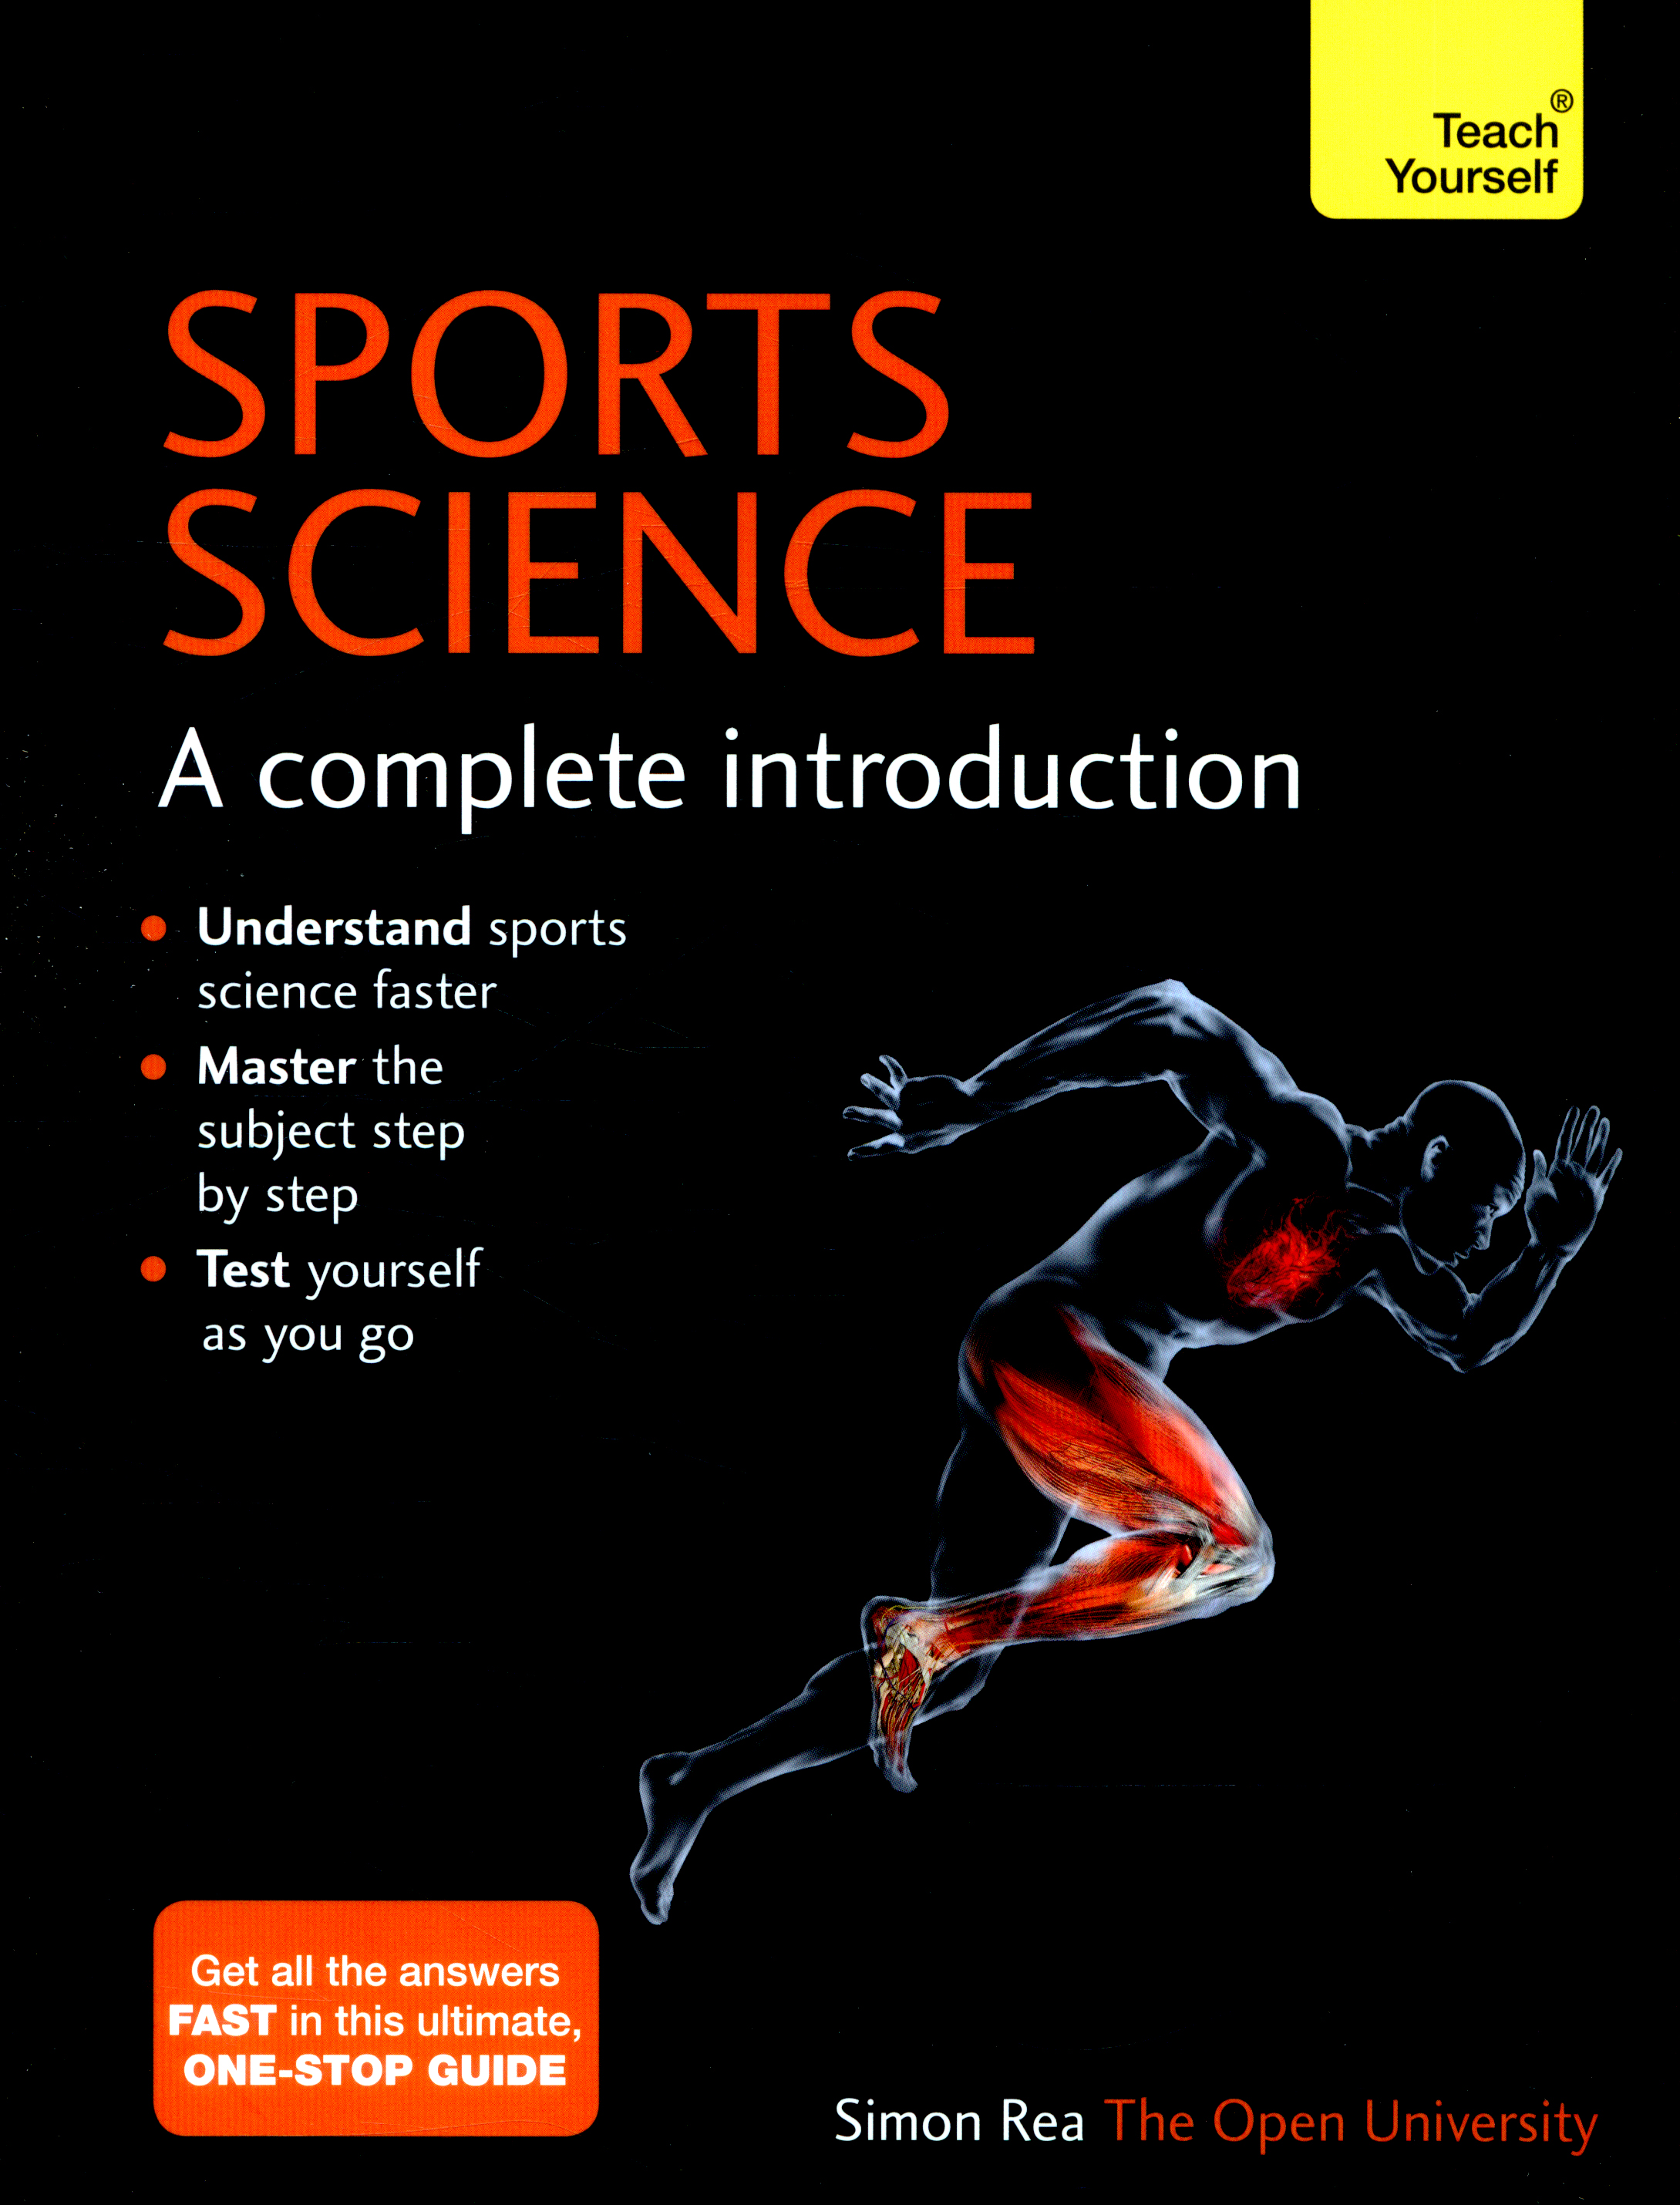 science articles sports